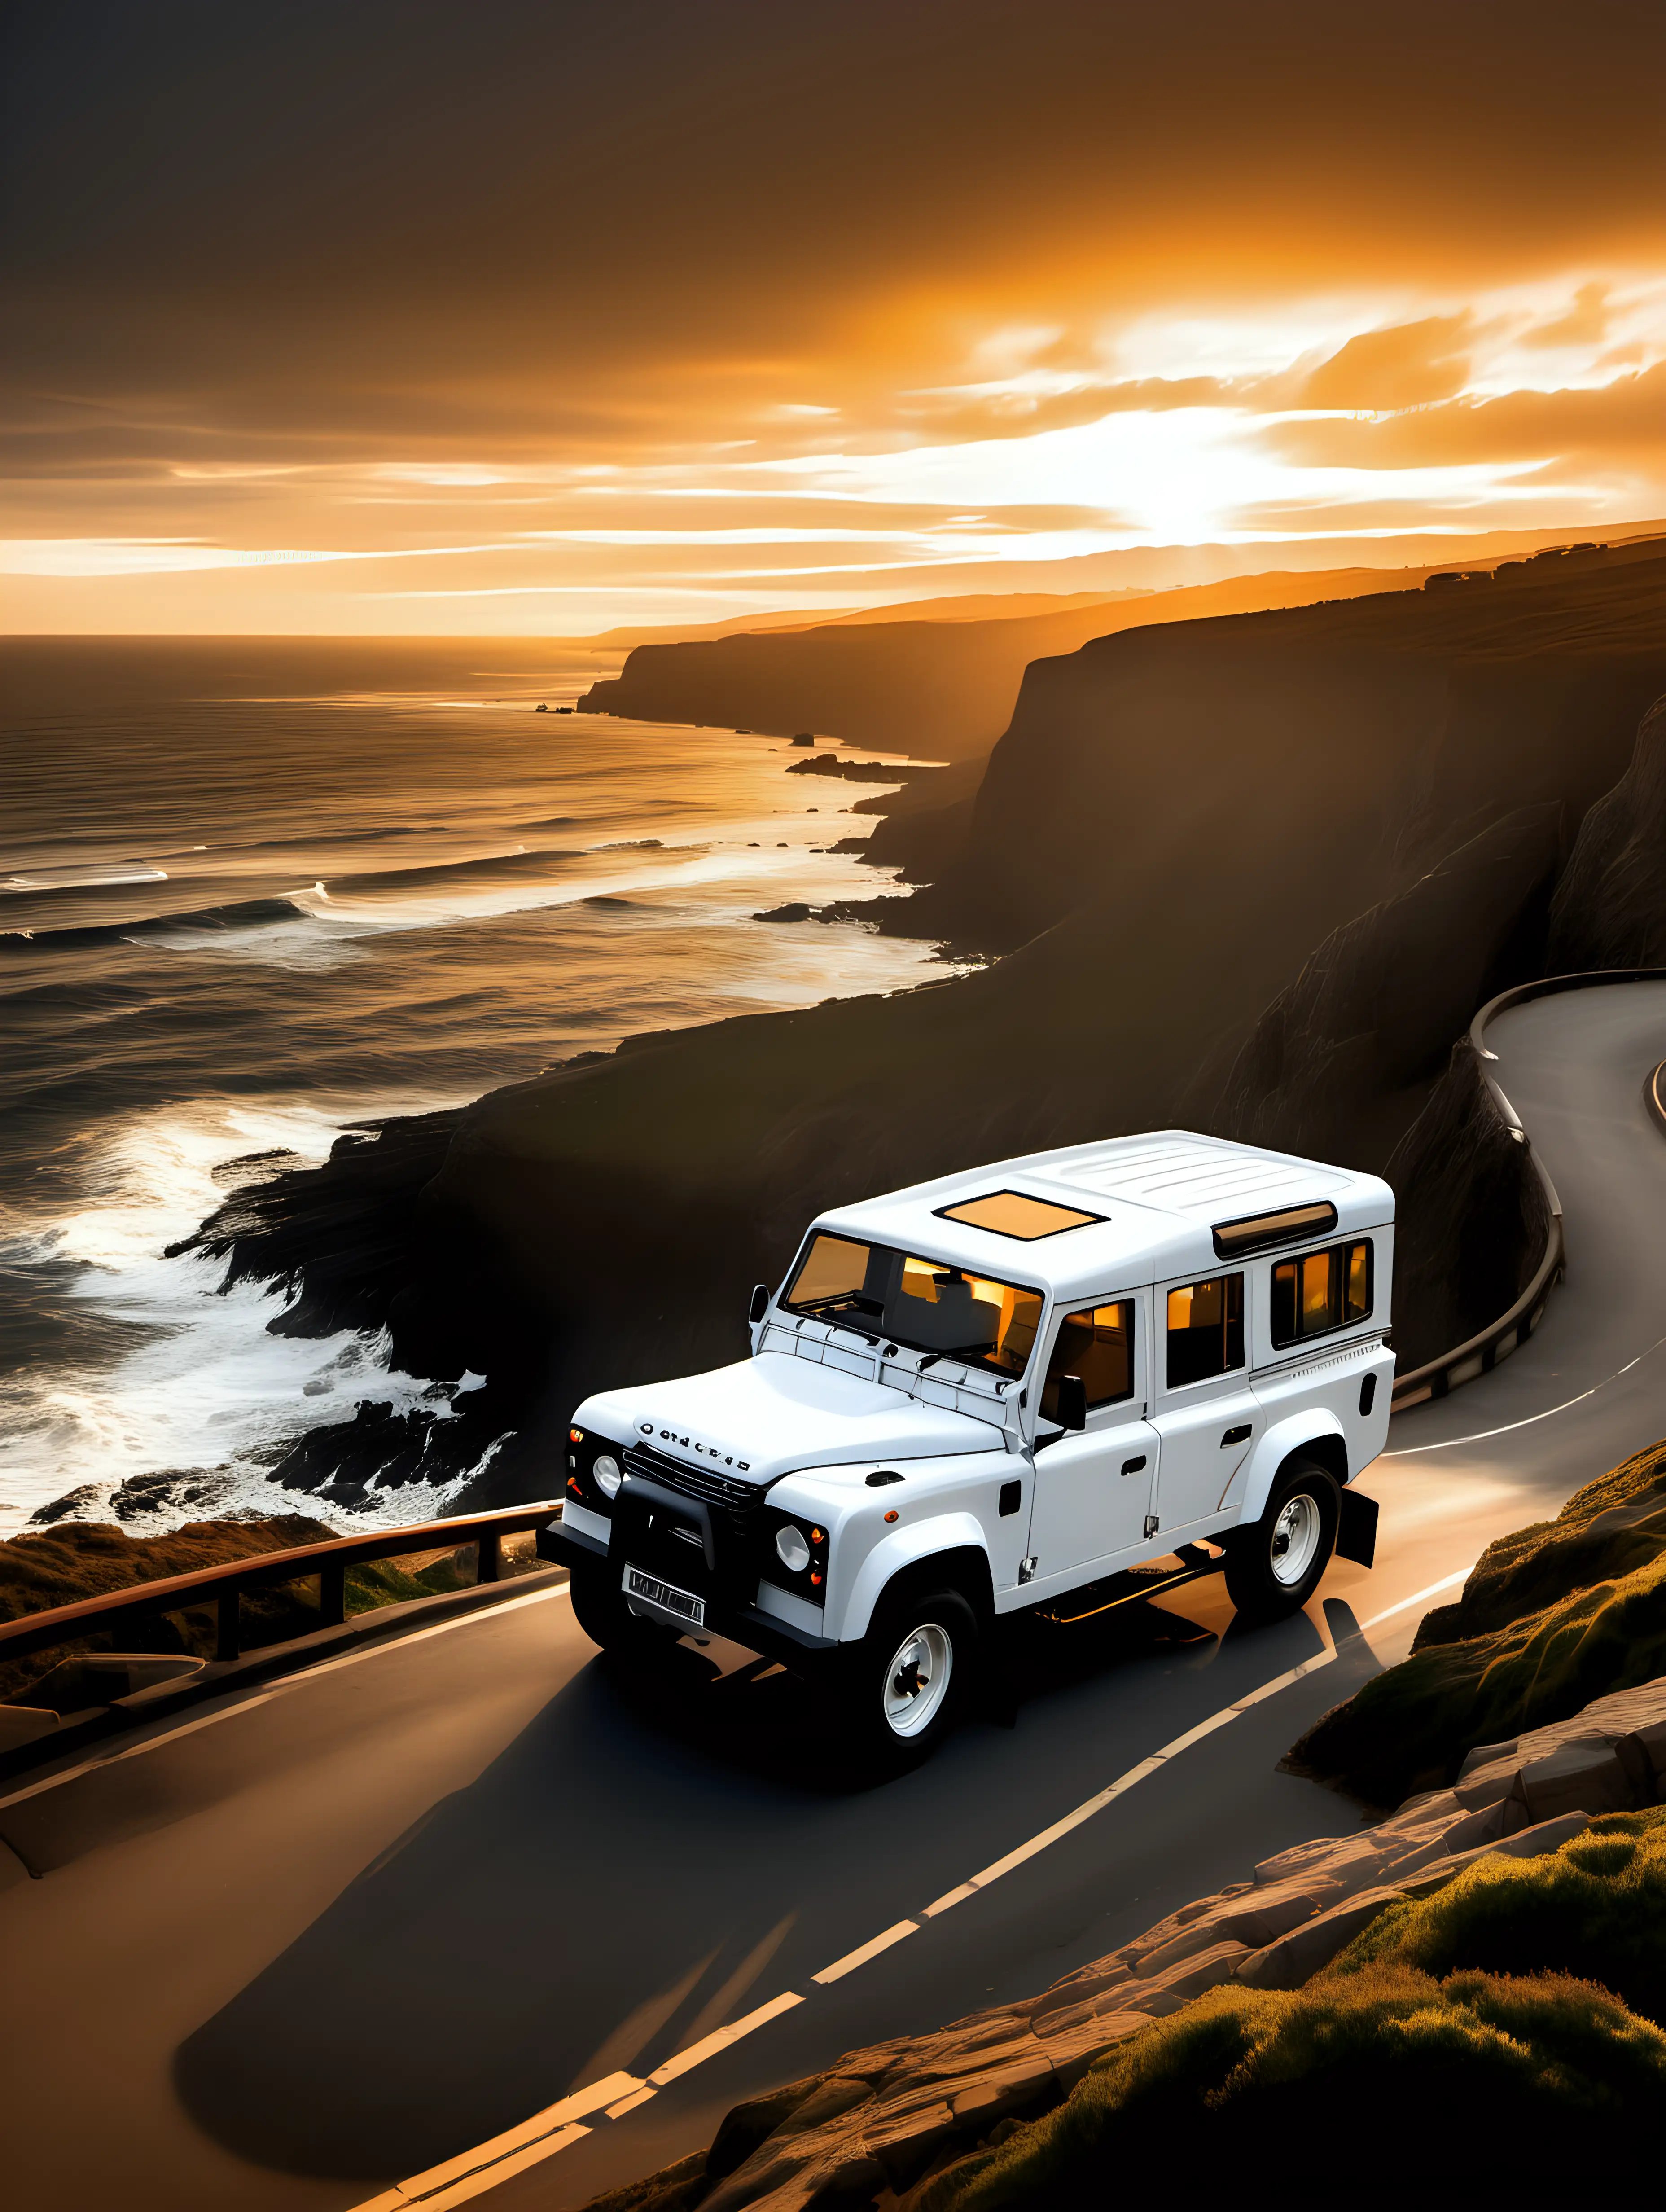 A stunning Defender 110 1987 White, through a winding coastal road at sunset, with golden sunlight casting a warm glow on the sleek curves of the vehicle against a backdrop of crashing waves and rugged cliffs.